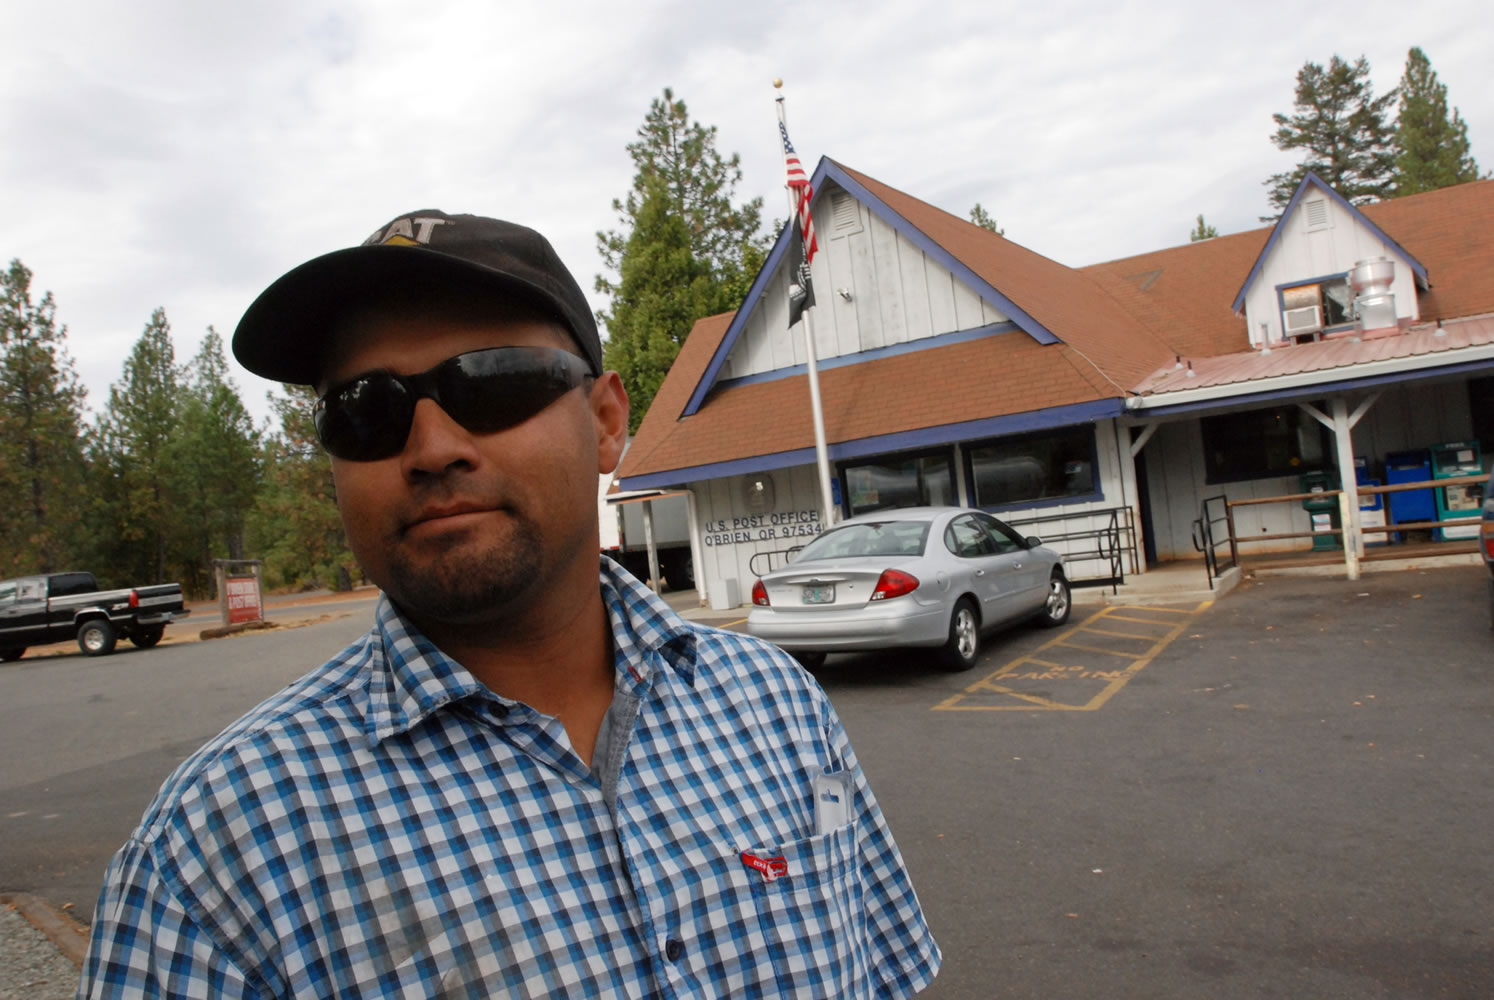 In this Oct. 12, 2012, photo, Hector Guzman poses for a photo in front of the post office in O'Brien, Ore., where cuts to sheriff's patrols prompted by the failure of a tax levy have inspired some local residents to organize armed patrols of the rural area of about 750 residents. Guzman, whose home was burglarized several years ago, said he likes the idea of people watching out for each other.